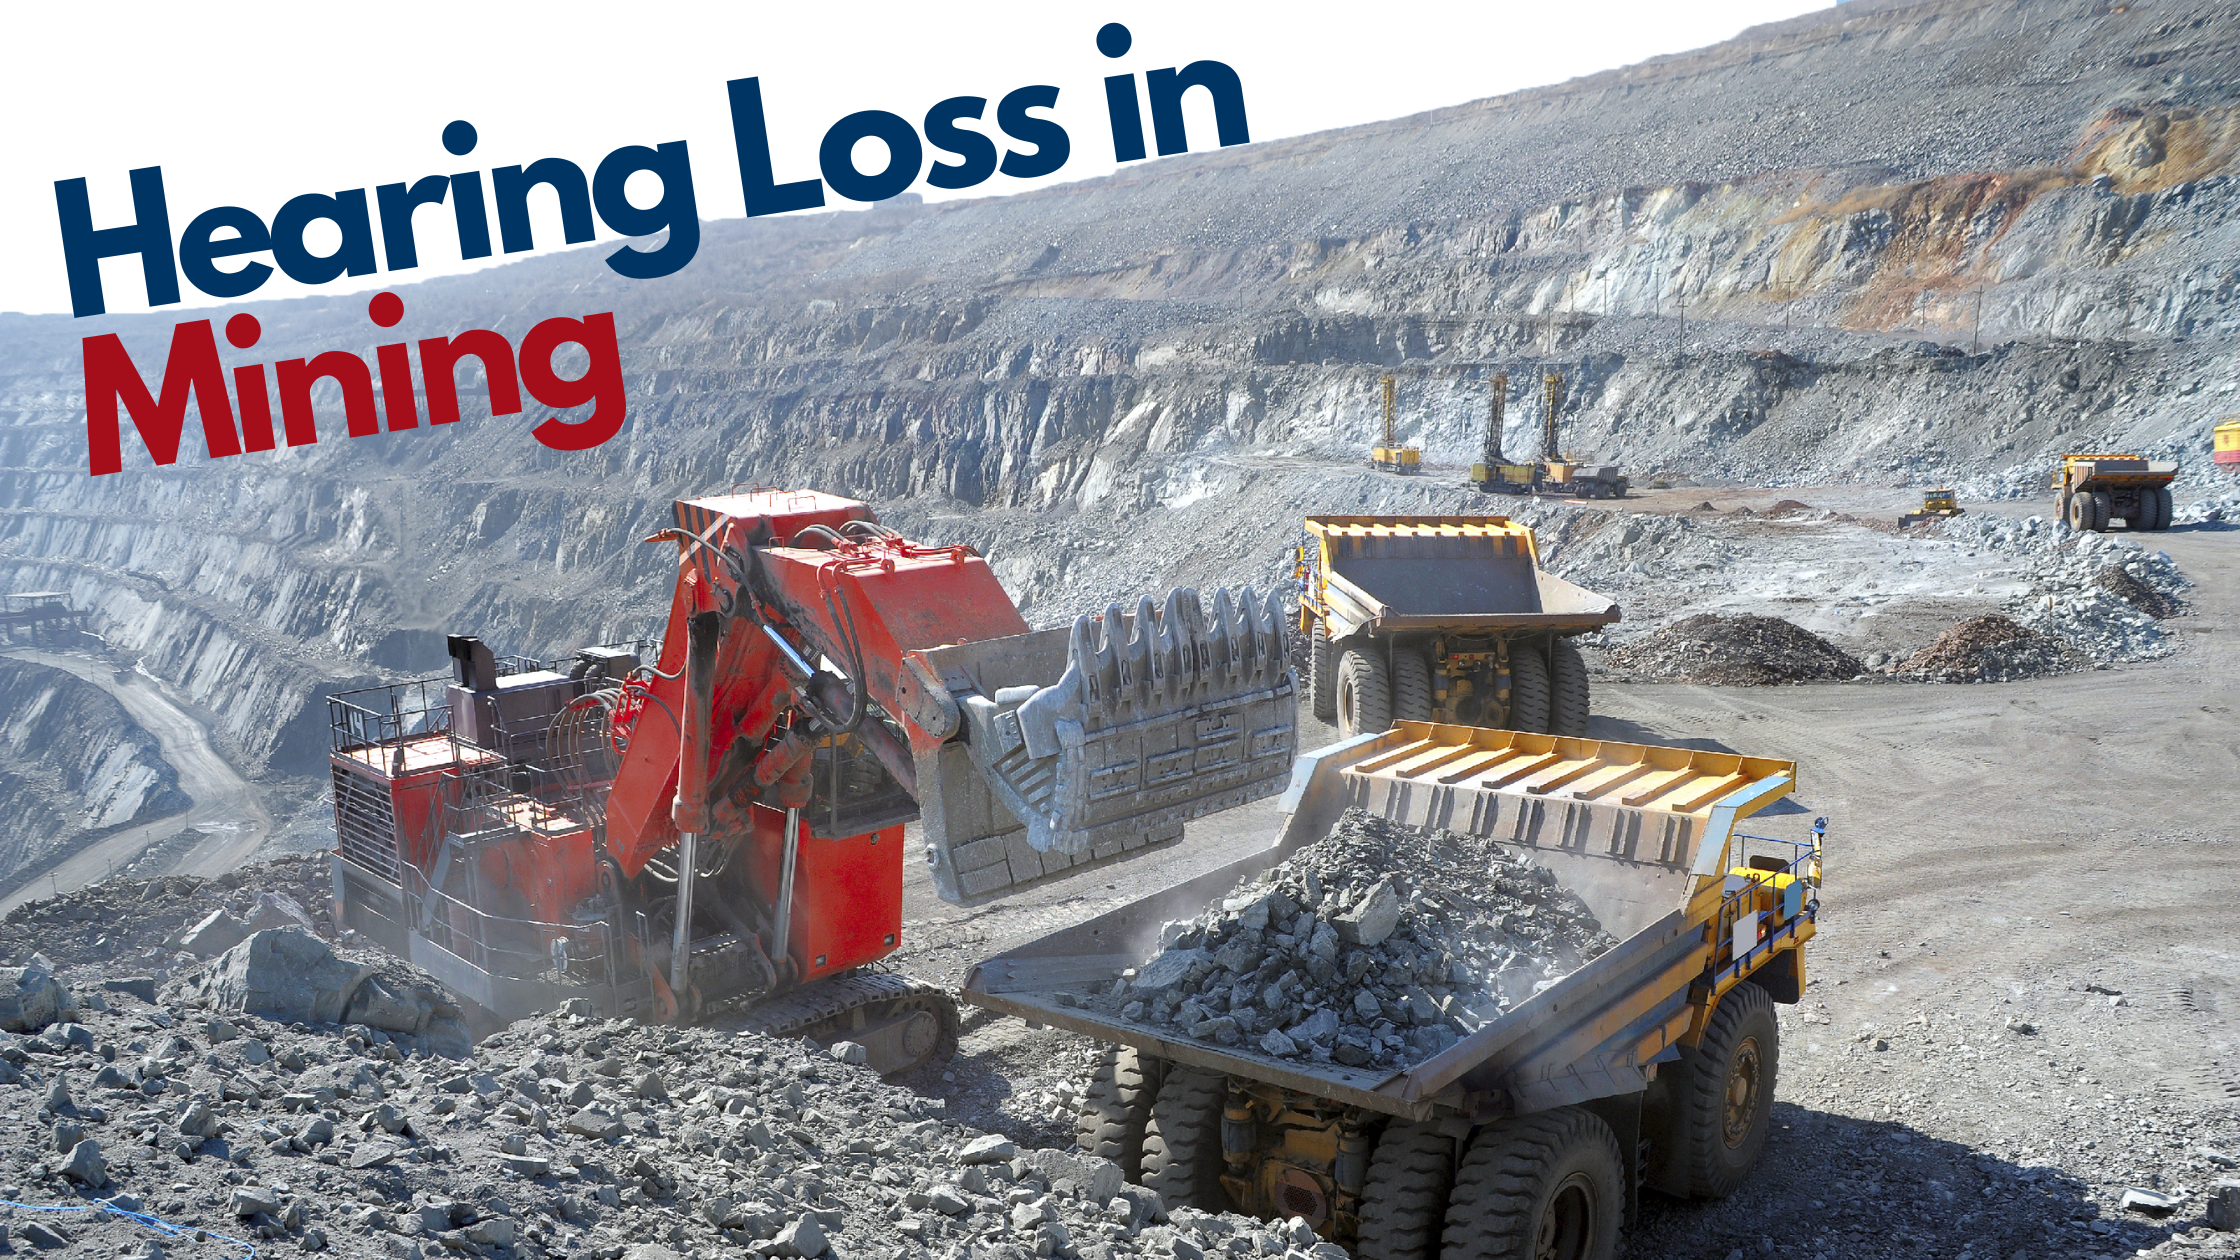 Hearing Loss in Mining: A Muffled Safety Concern for Nearly 30 Years